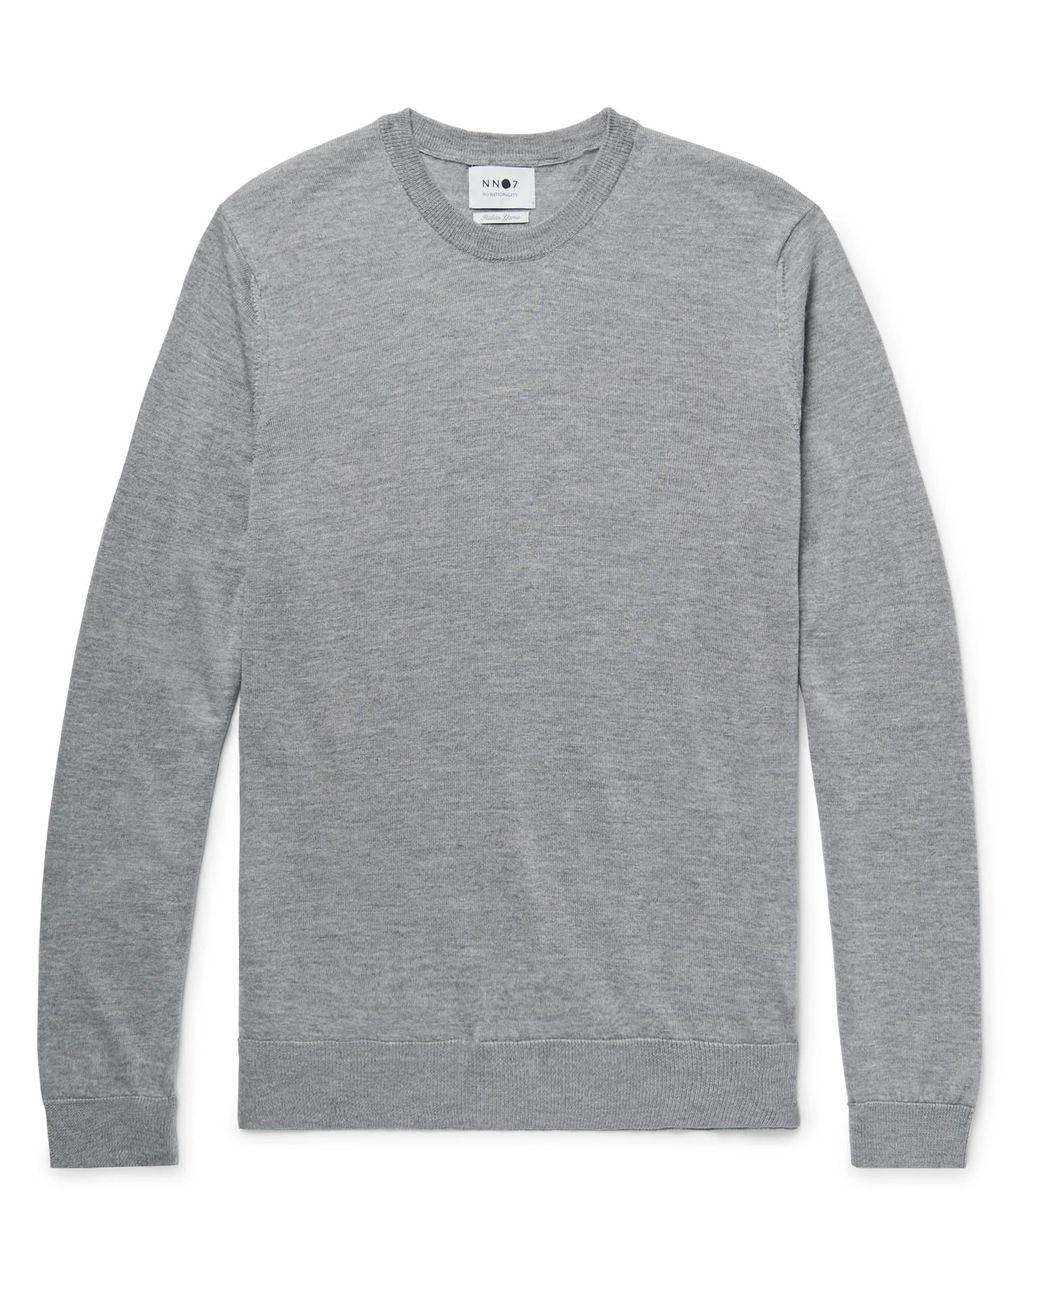 NN07 Ted Mélange Merino Wool Sweater in Gray for Men - Lyst